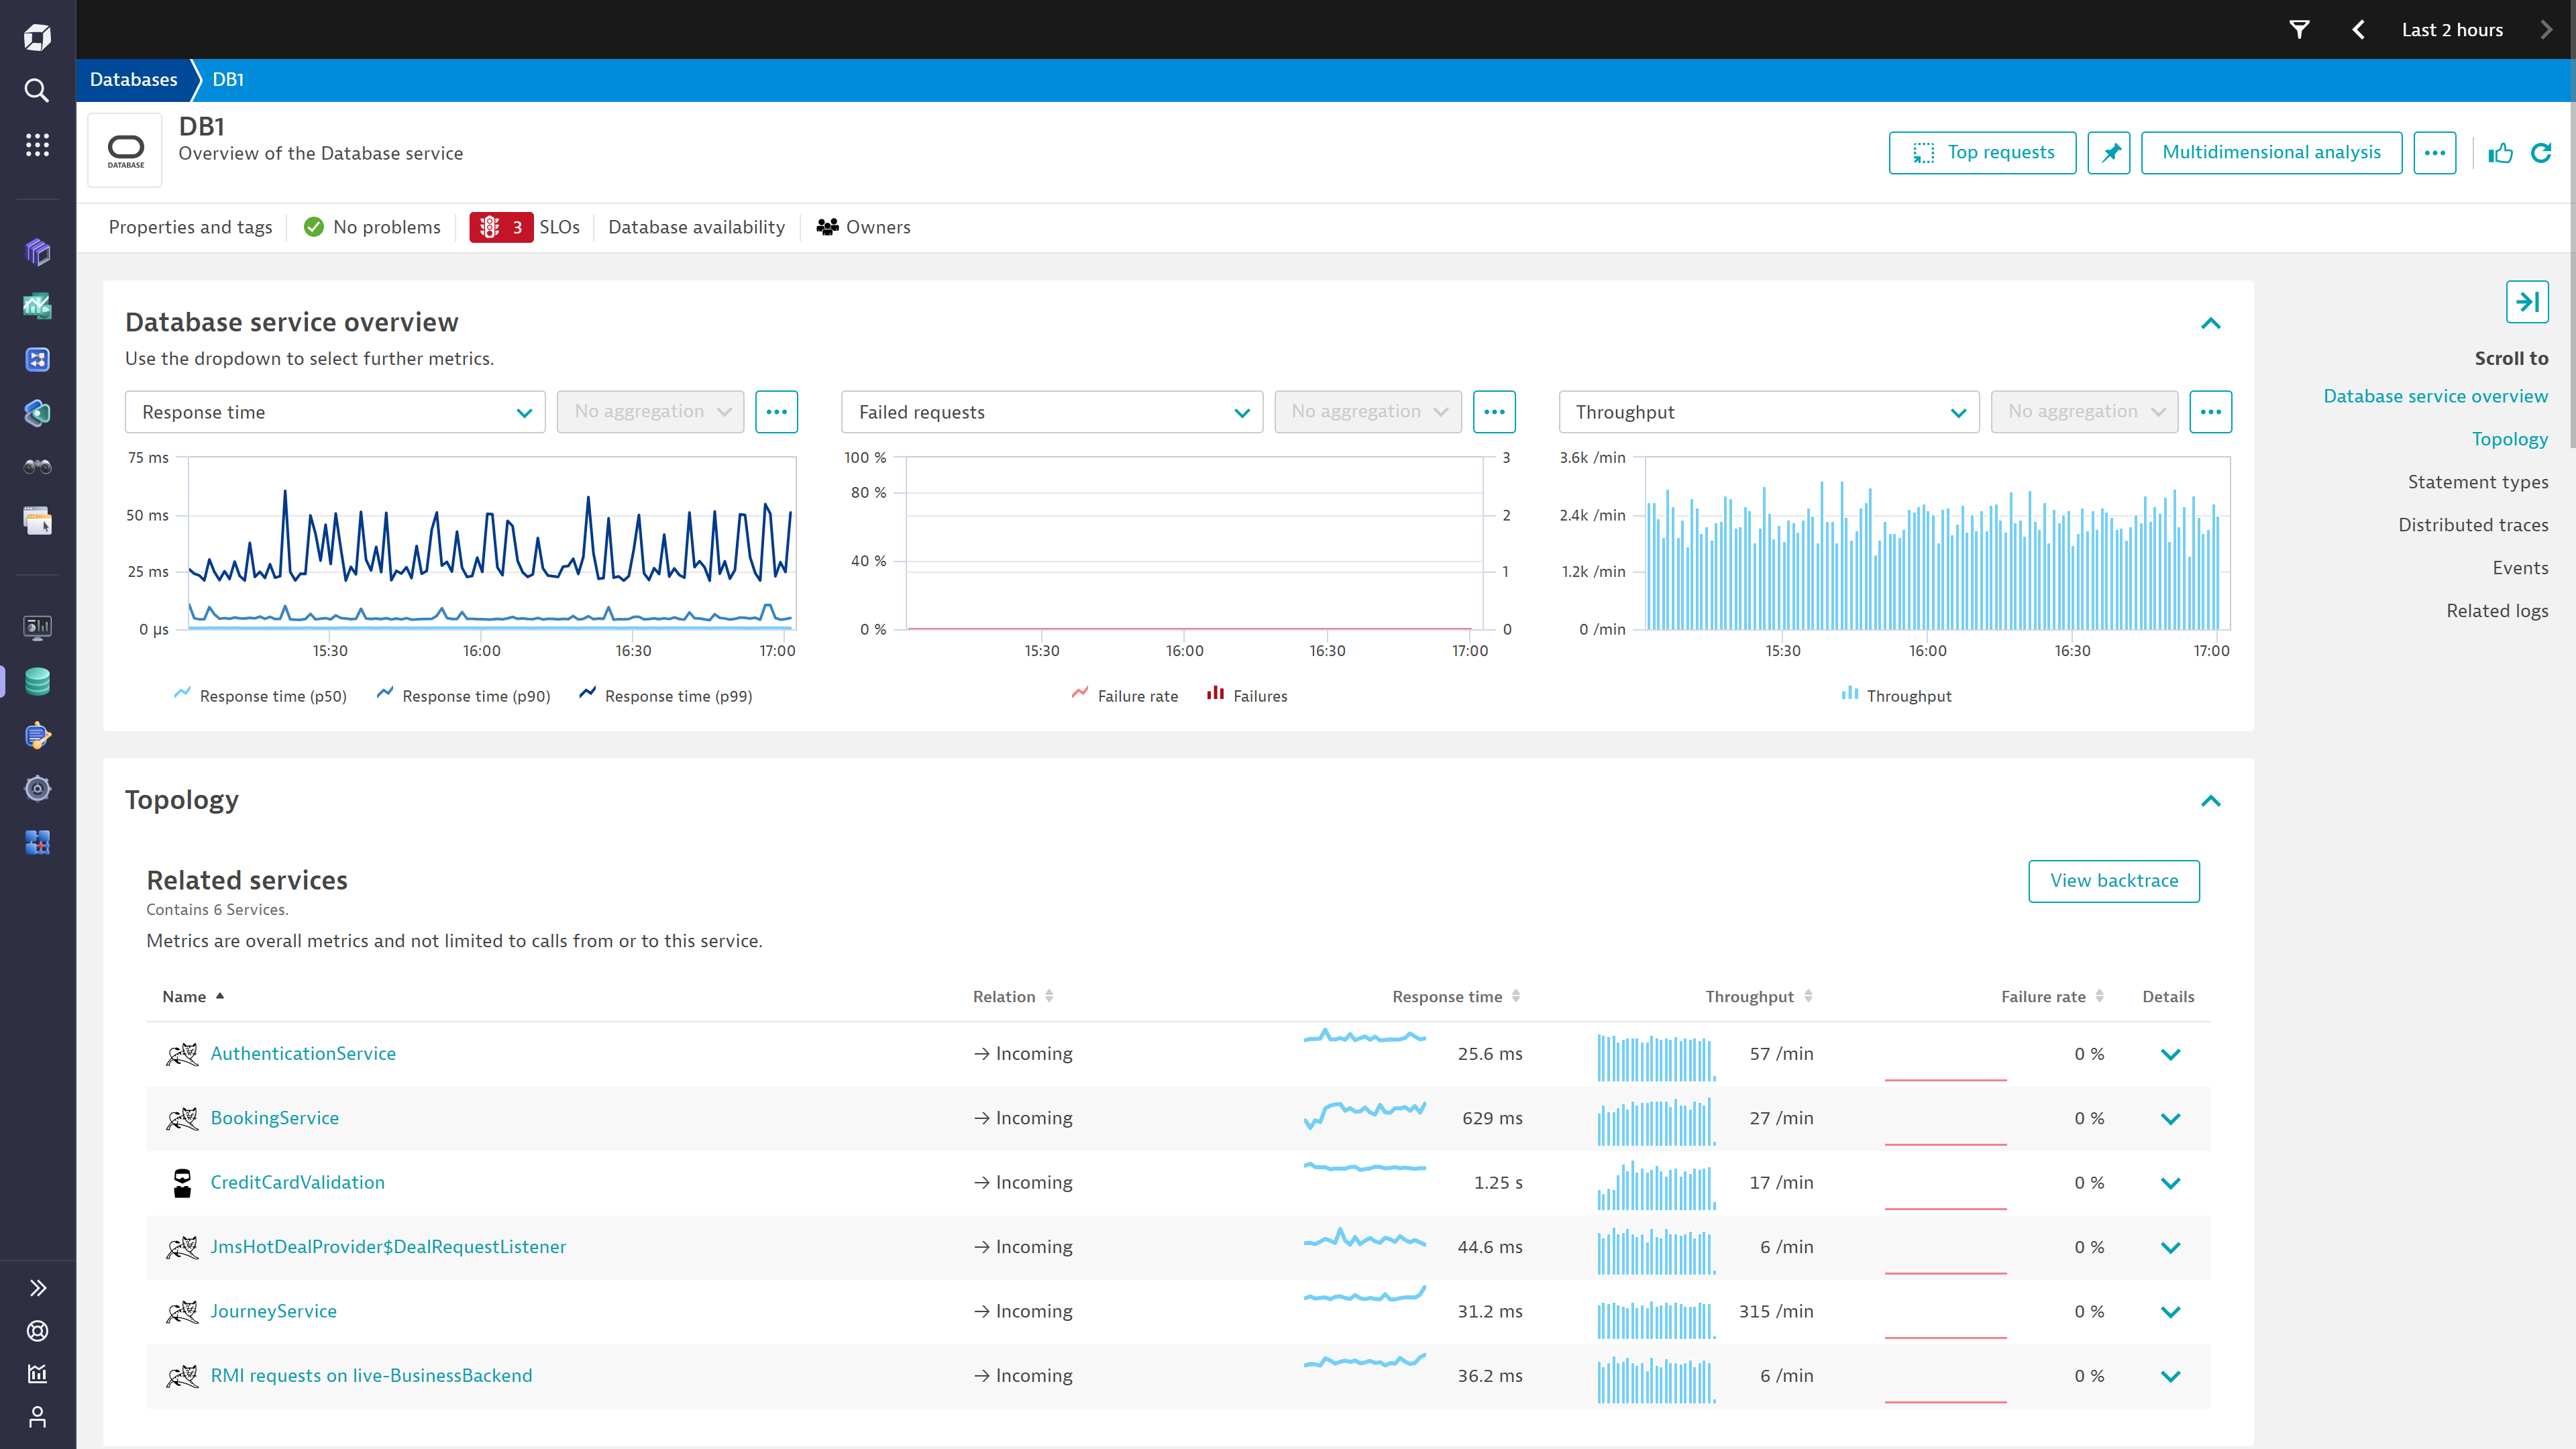 The Dynatrace OneAgent offers the highest fidelity data when it comes to application observability. Get started on the client side by instrumenting your applications and building an understanding of your database performance from their perspective.